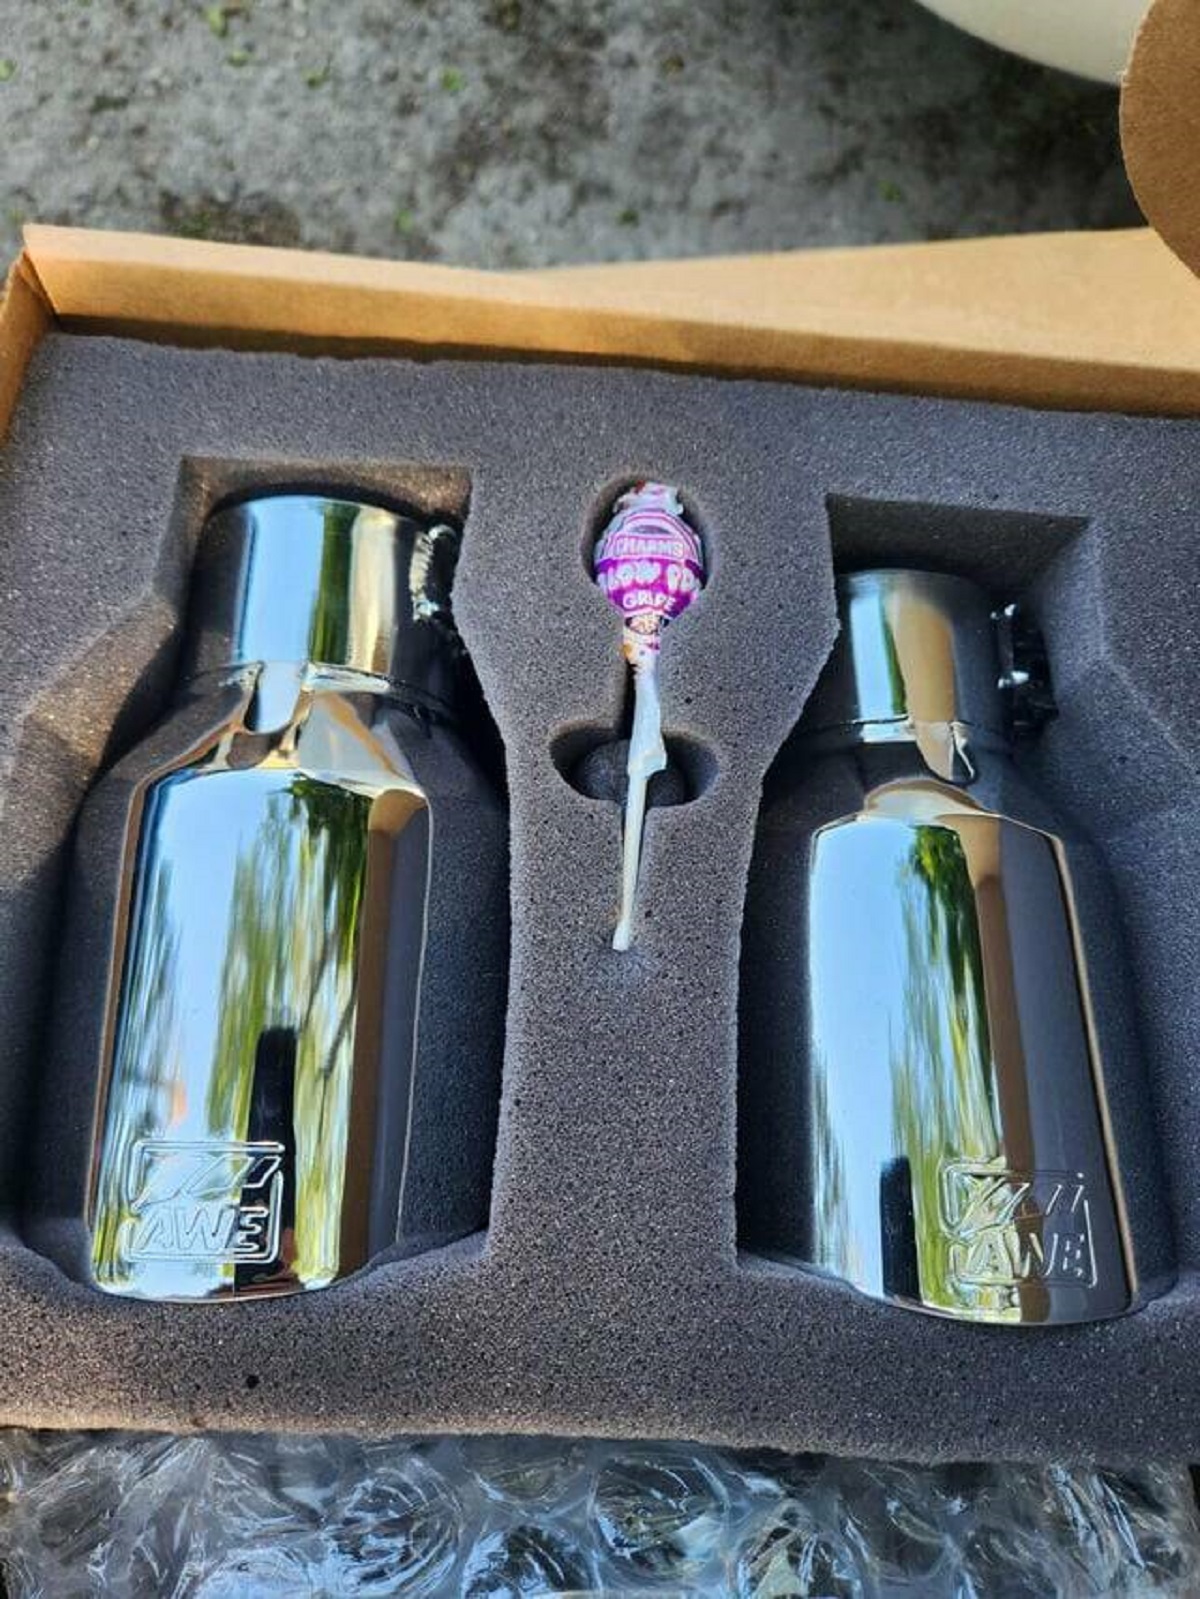 "My exhaust tips came with a lollipop with its own dedicated slot in the packaging"